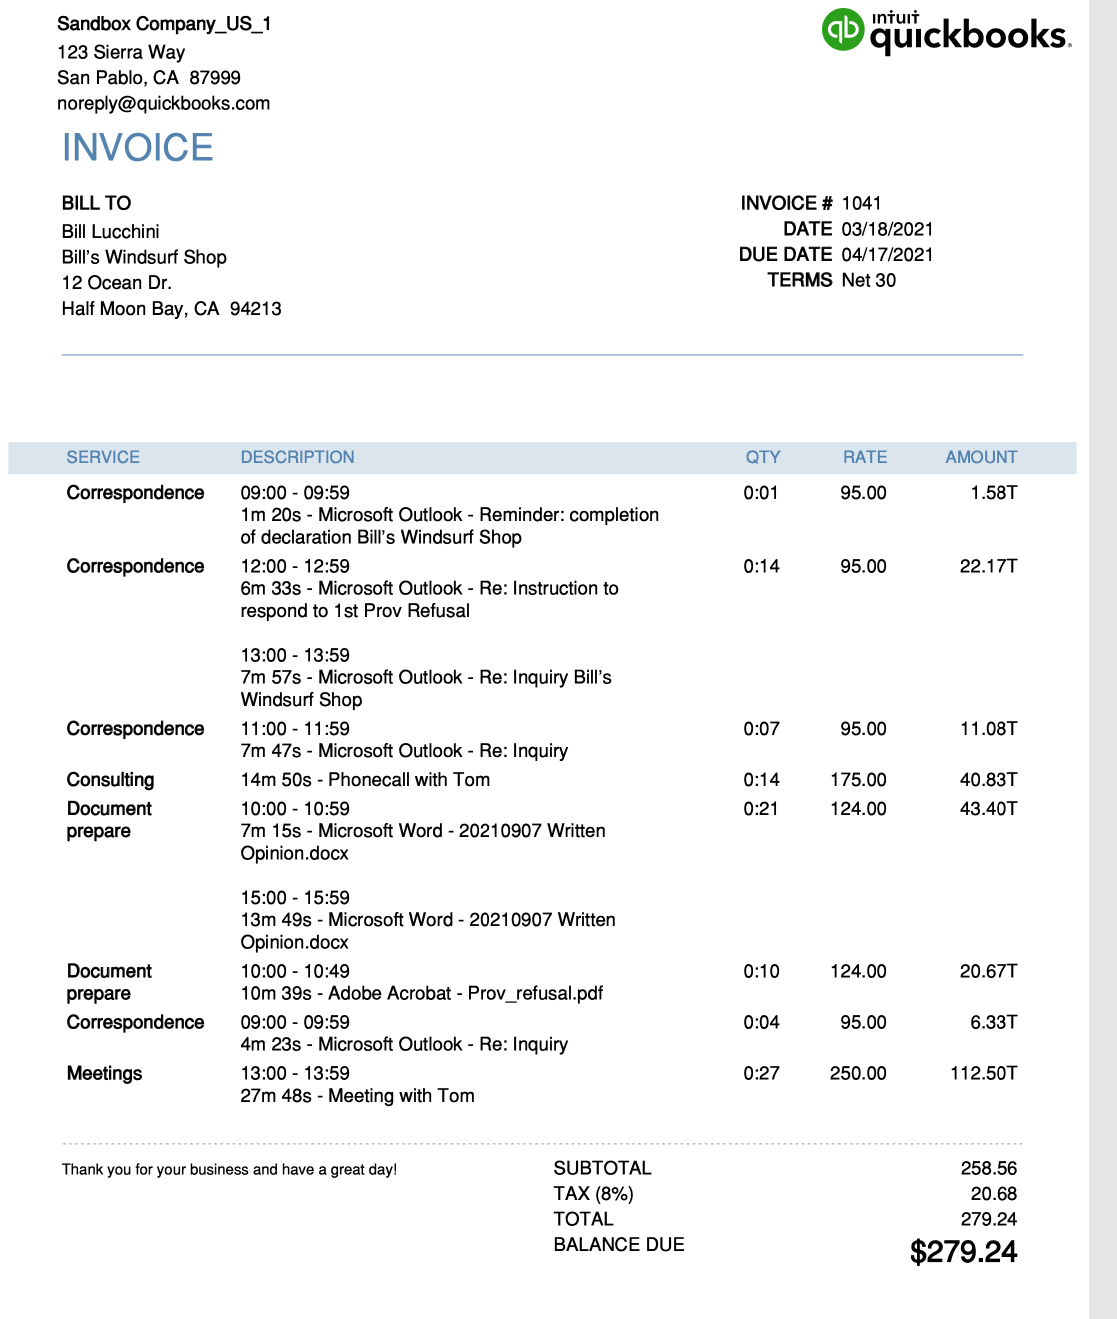 Seamlessly create detailed invoices